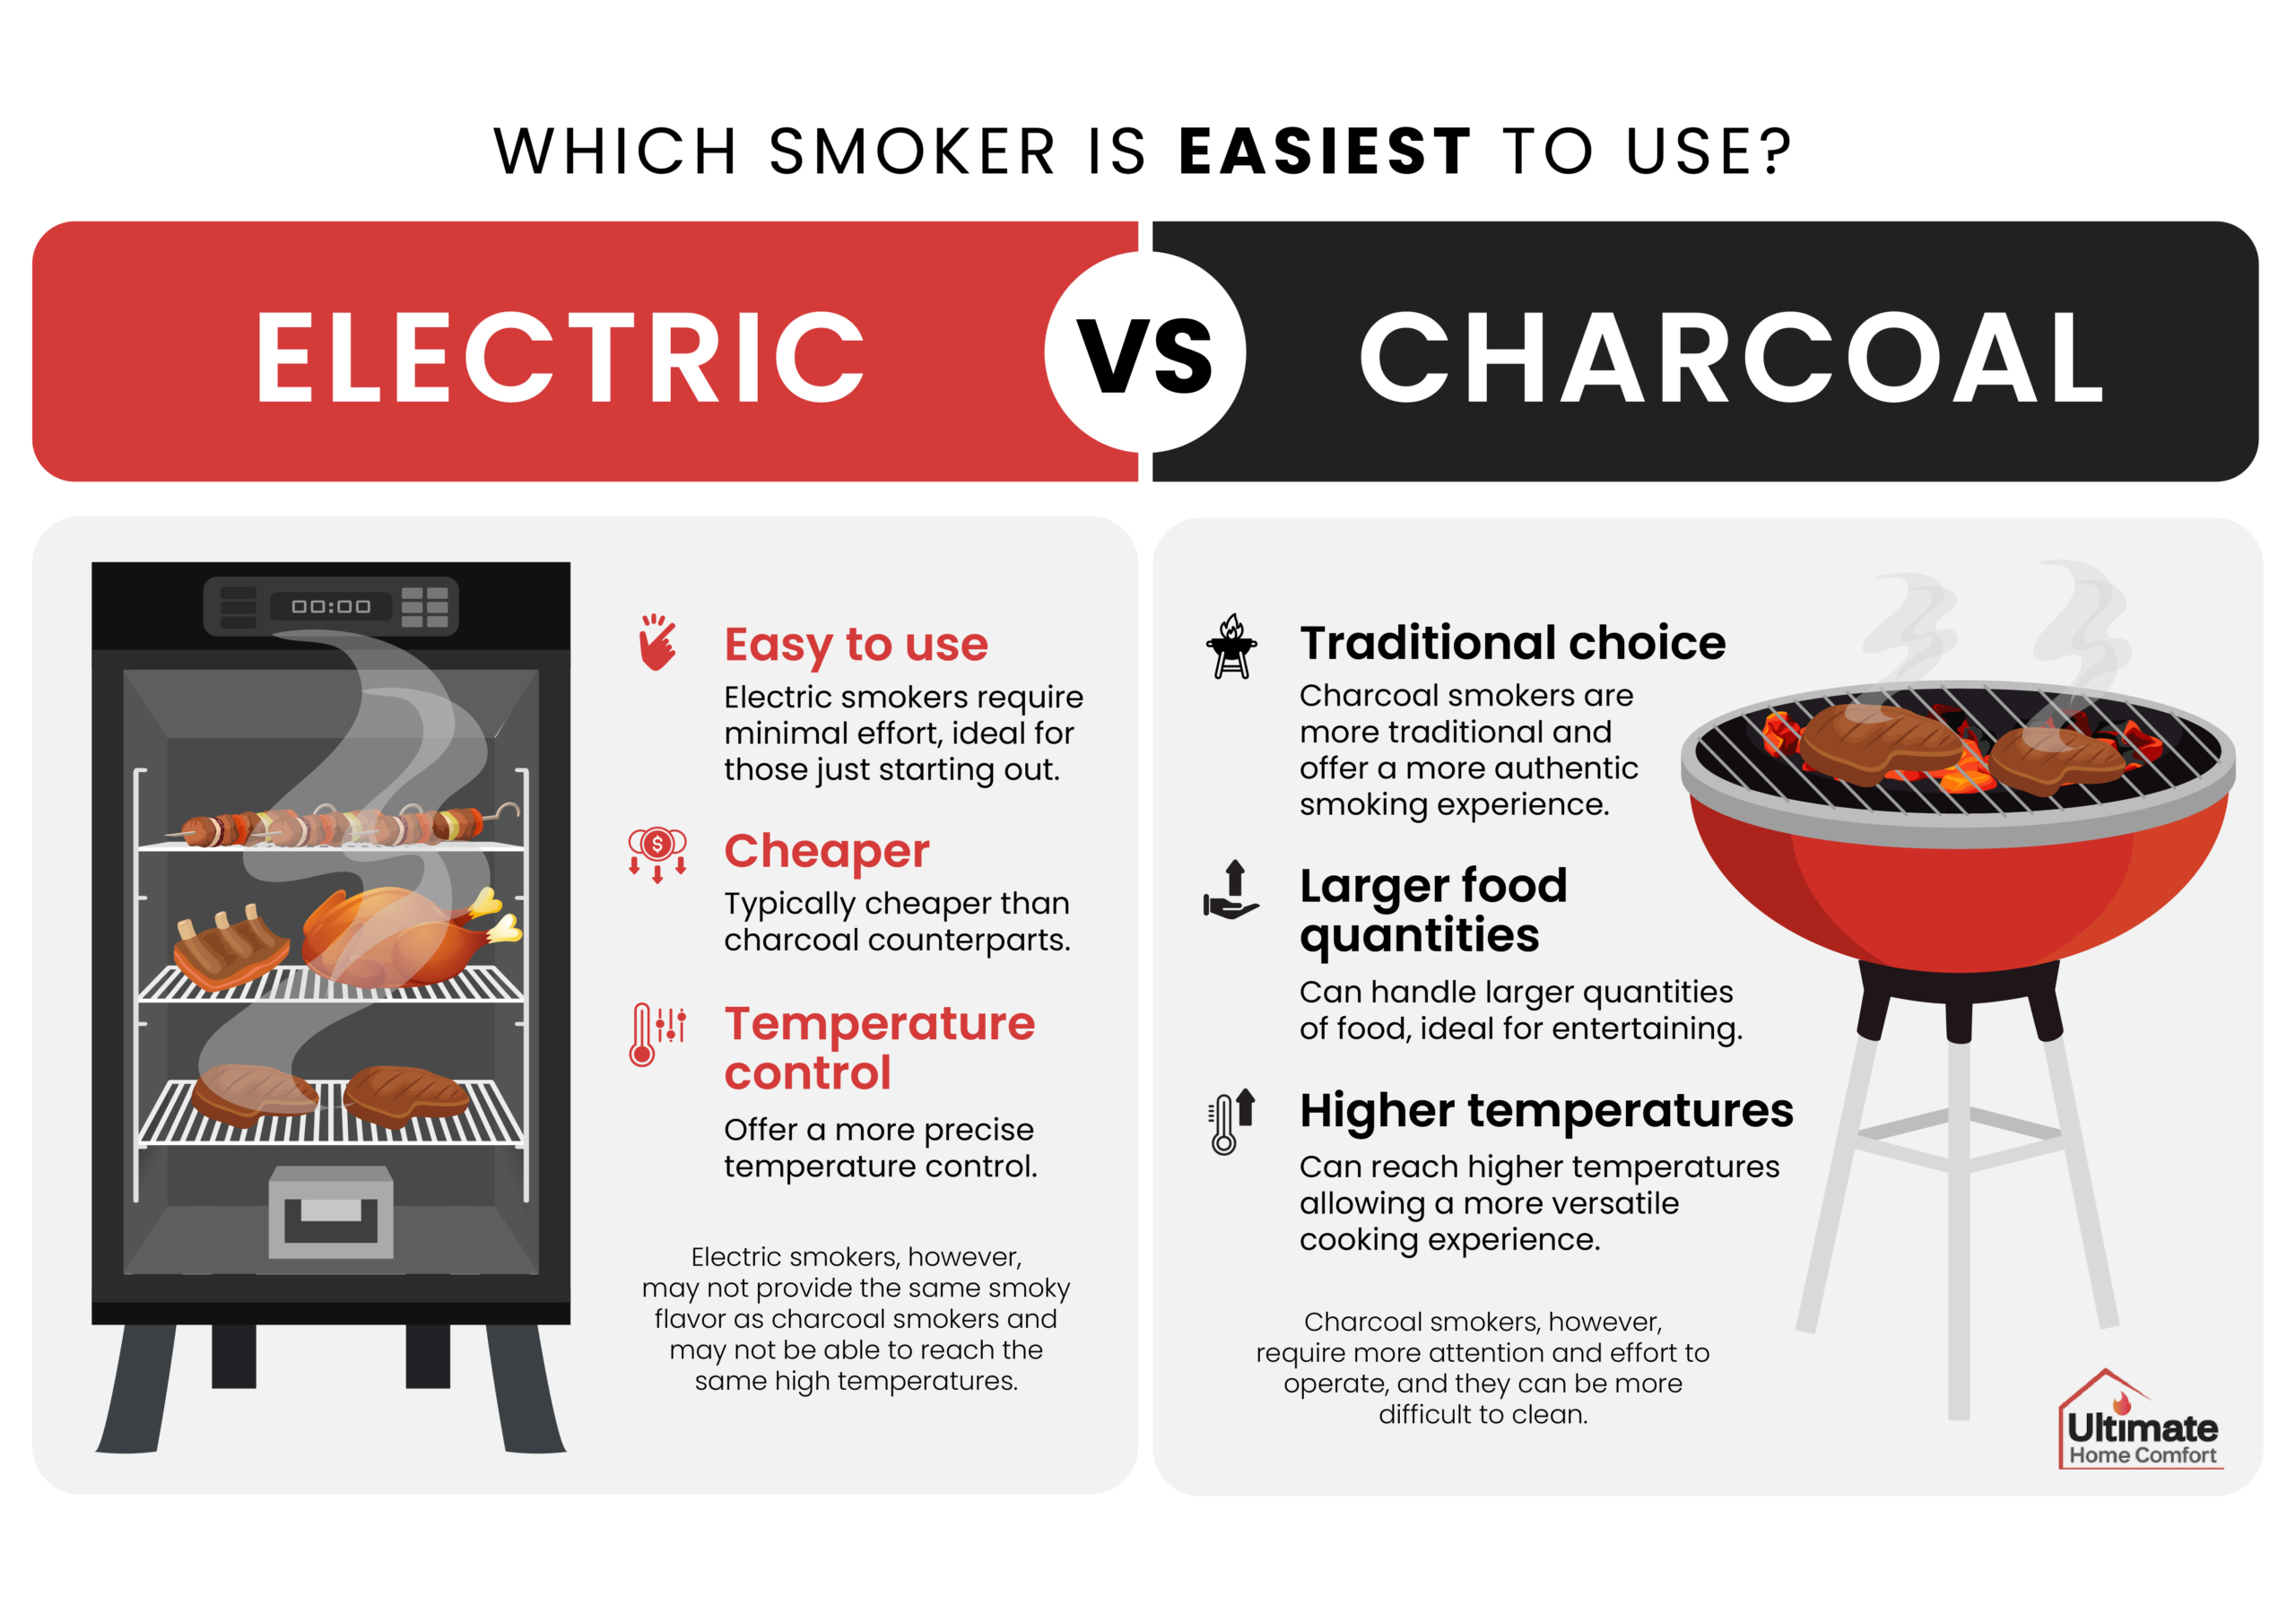 Electric vs. Charcoal Smoker - Which is easiest to use - infographic